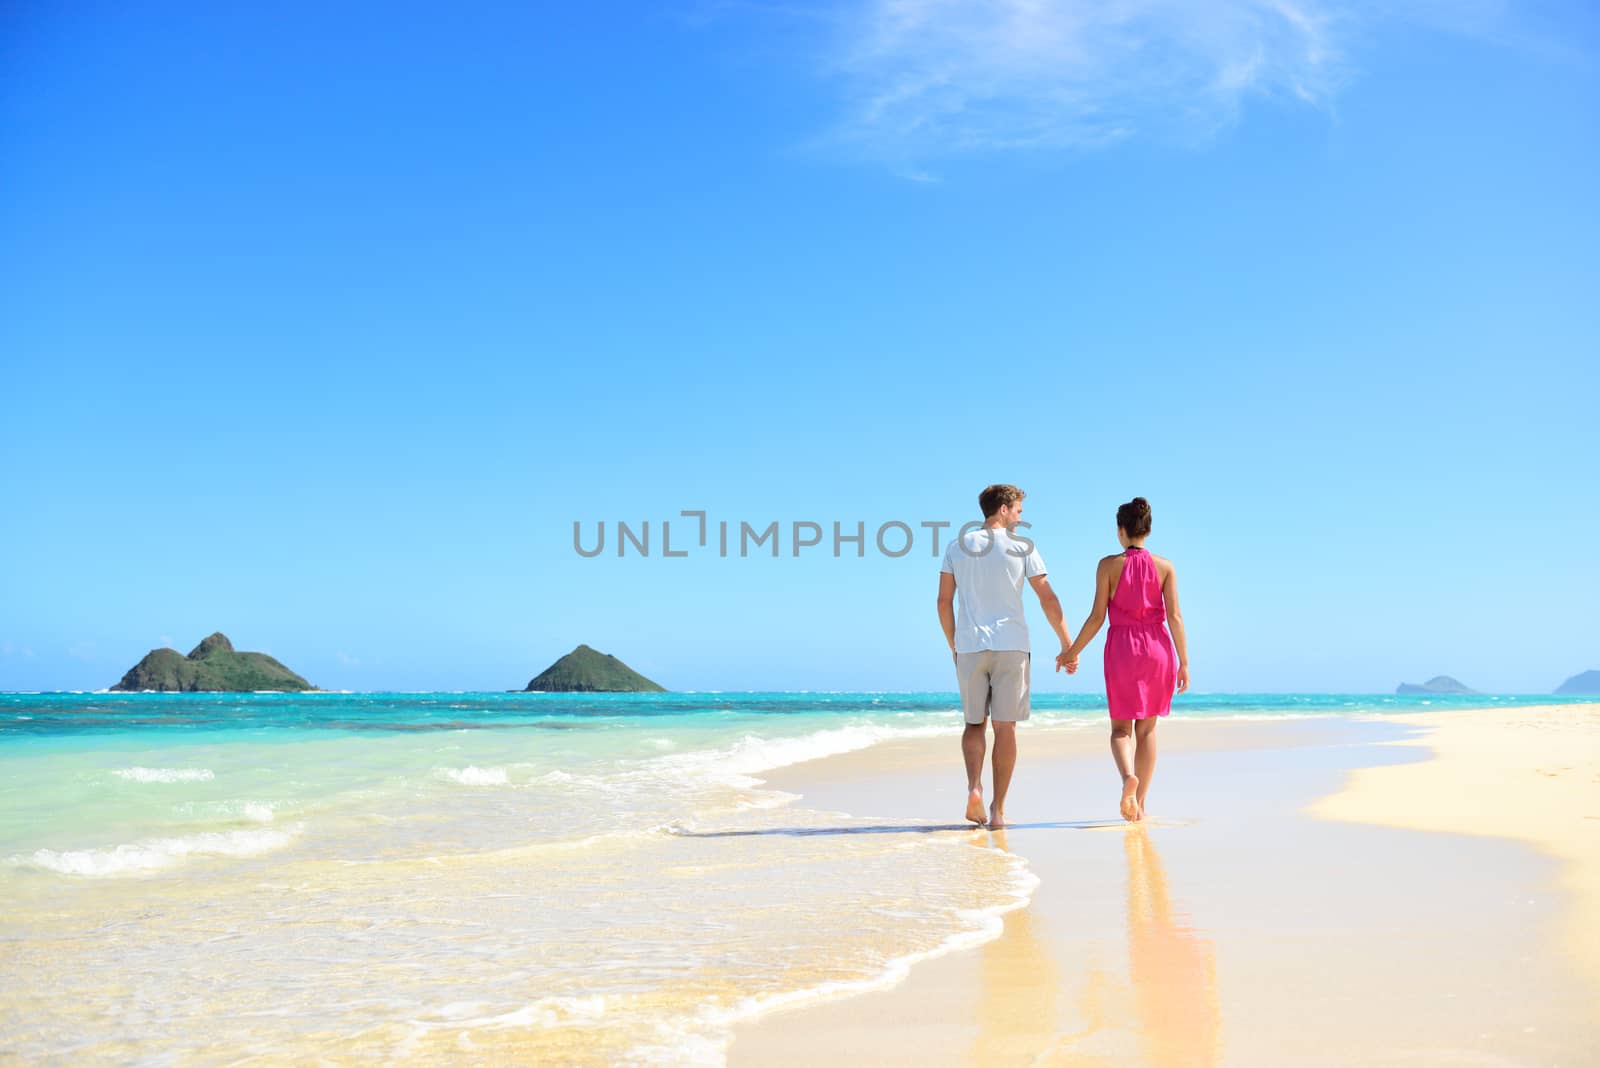 Beach honeymoon couple holding hands walking on white sand beach. Newlyweds happy in love relaxing on summer holidays on Lanikai beach, Oahu, Hawaii, USA with Mokulua Islands. Travel vacation concept.